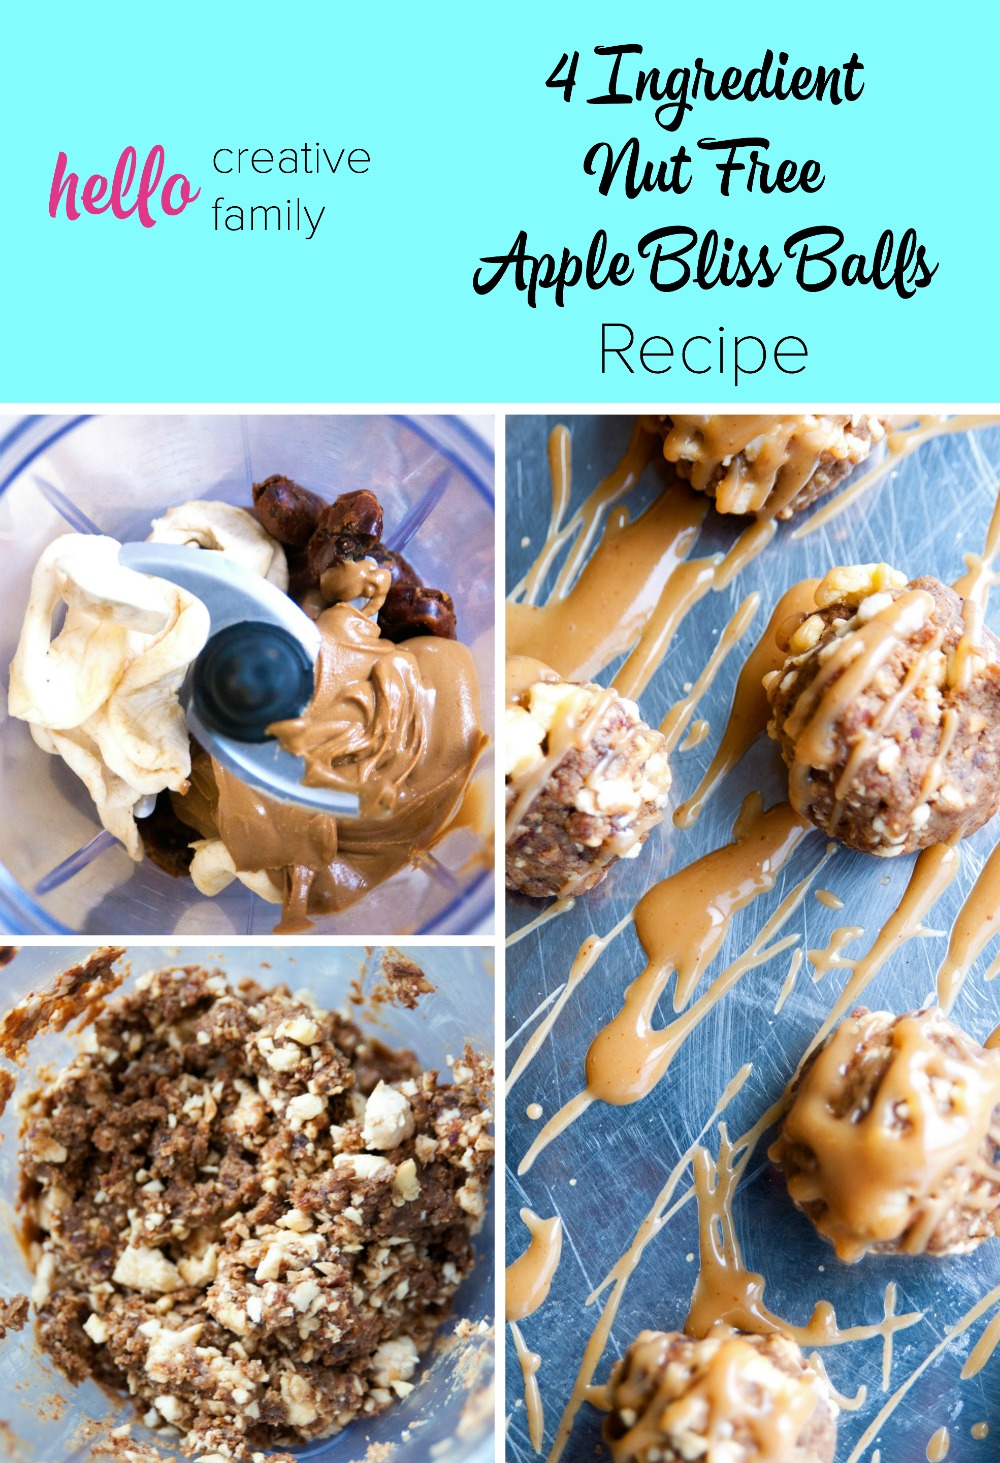 Nut free and sugar free, these 4 ingredient bliss balls are a healthy school lunch idea! Sweetened with dates and apples this nut free bliss balls recipe tastes like dessert but is guilt free! Perfect for those living a clean eating diet lifestyle!